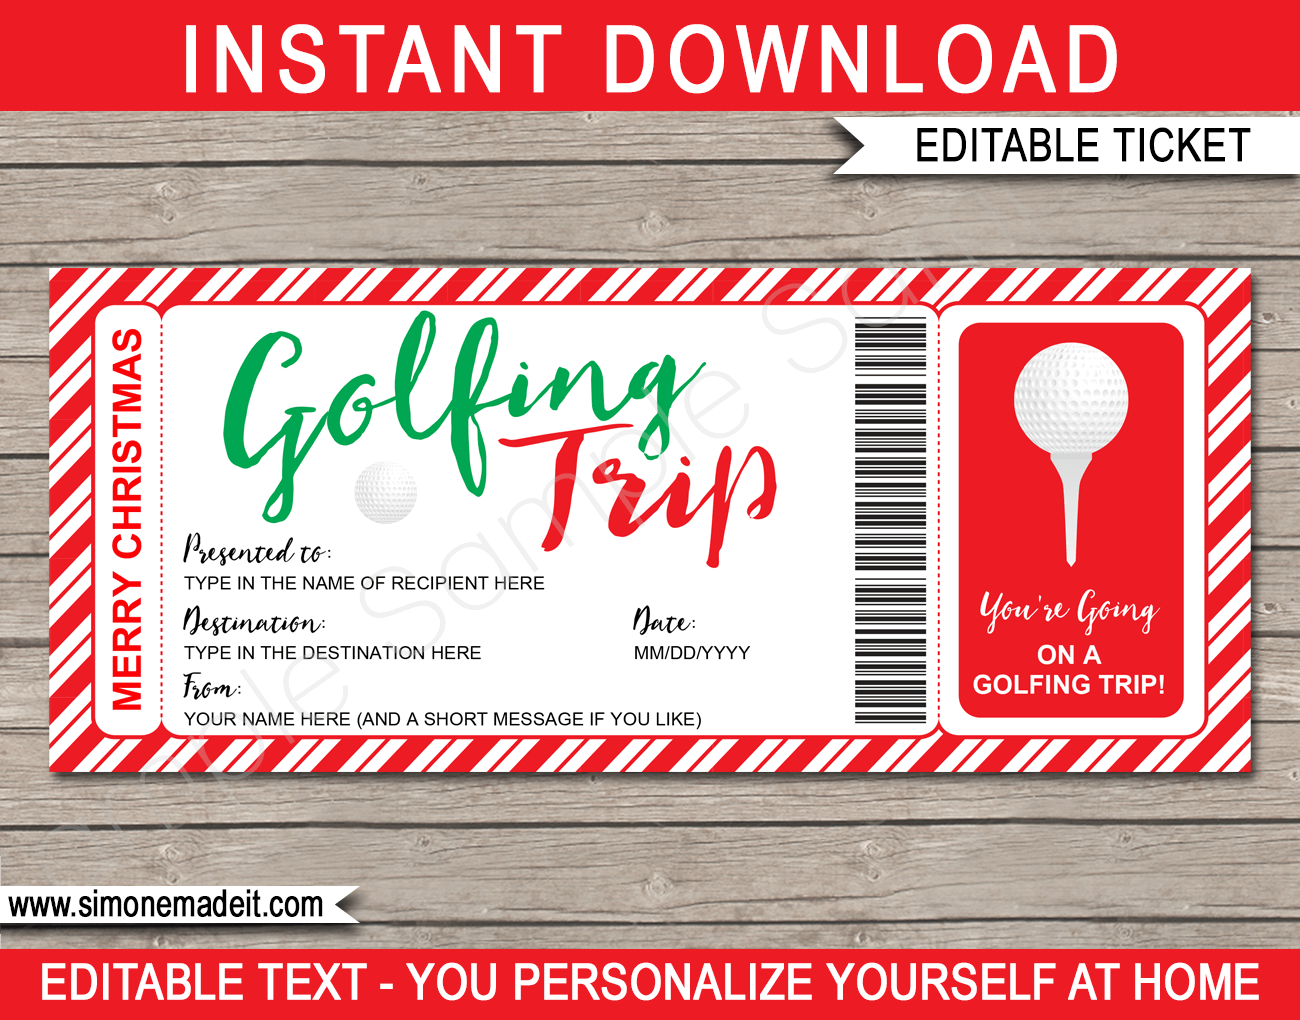 Christmas Golfing Trip Ticket Gift Voucher  Editable & Printable For Golf Gift Certificate Template